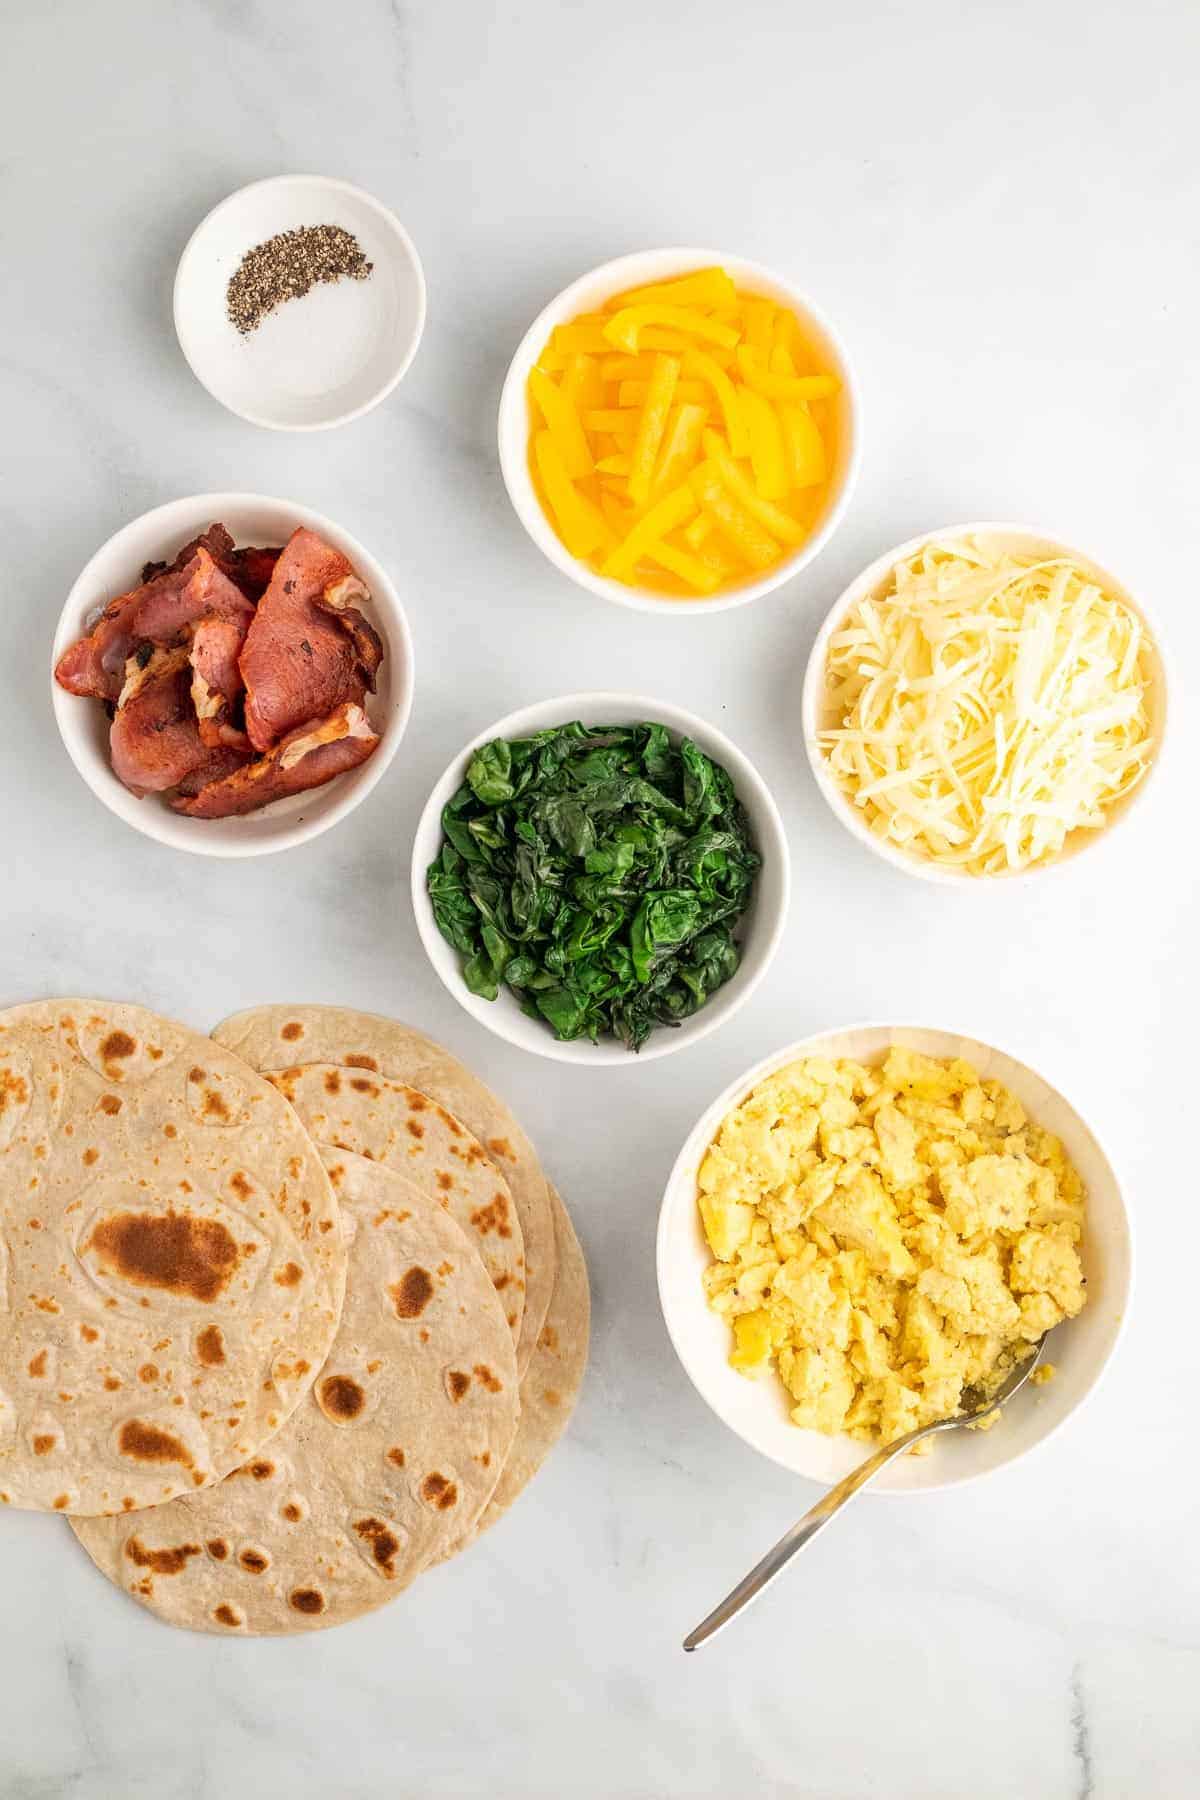 Individual burrito ingredients in separate ramekins and bowls, as seen from above